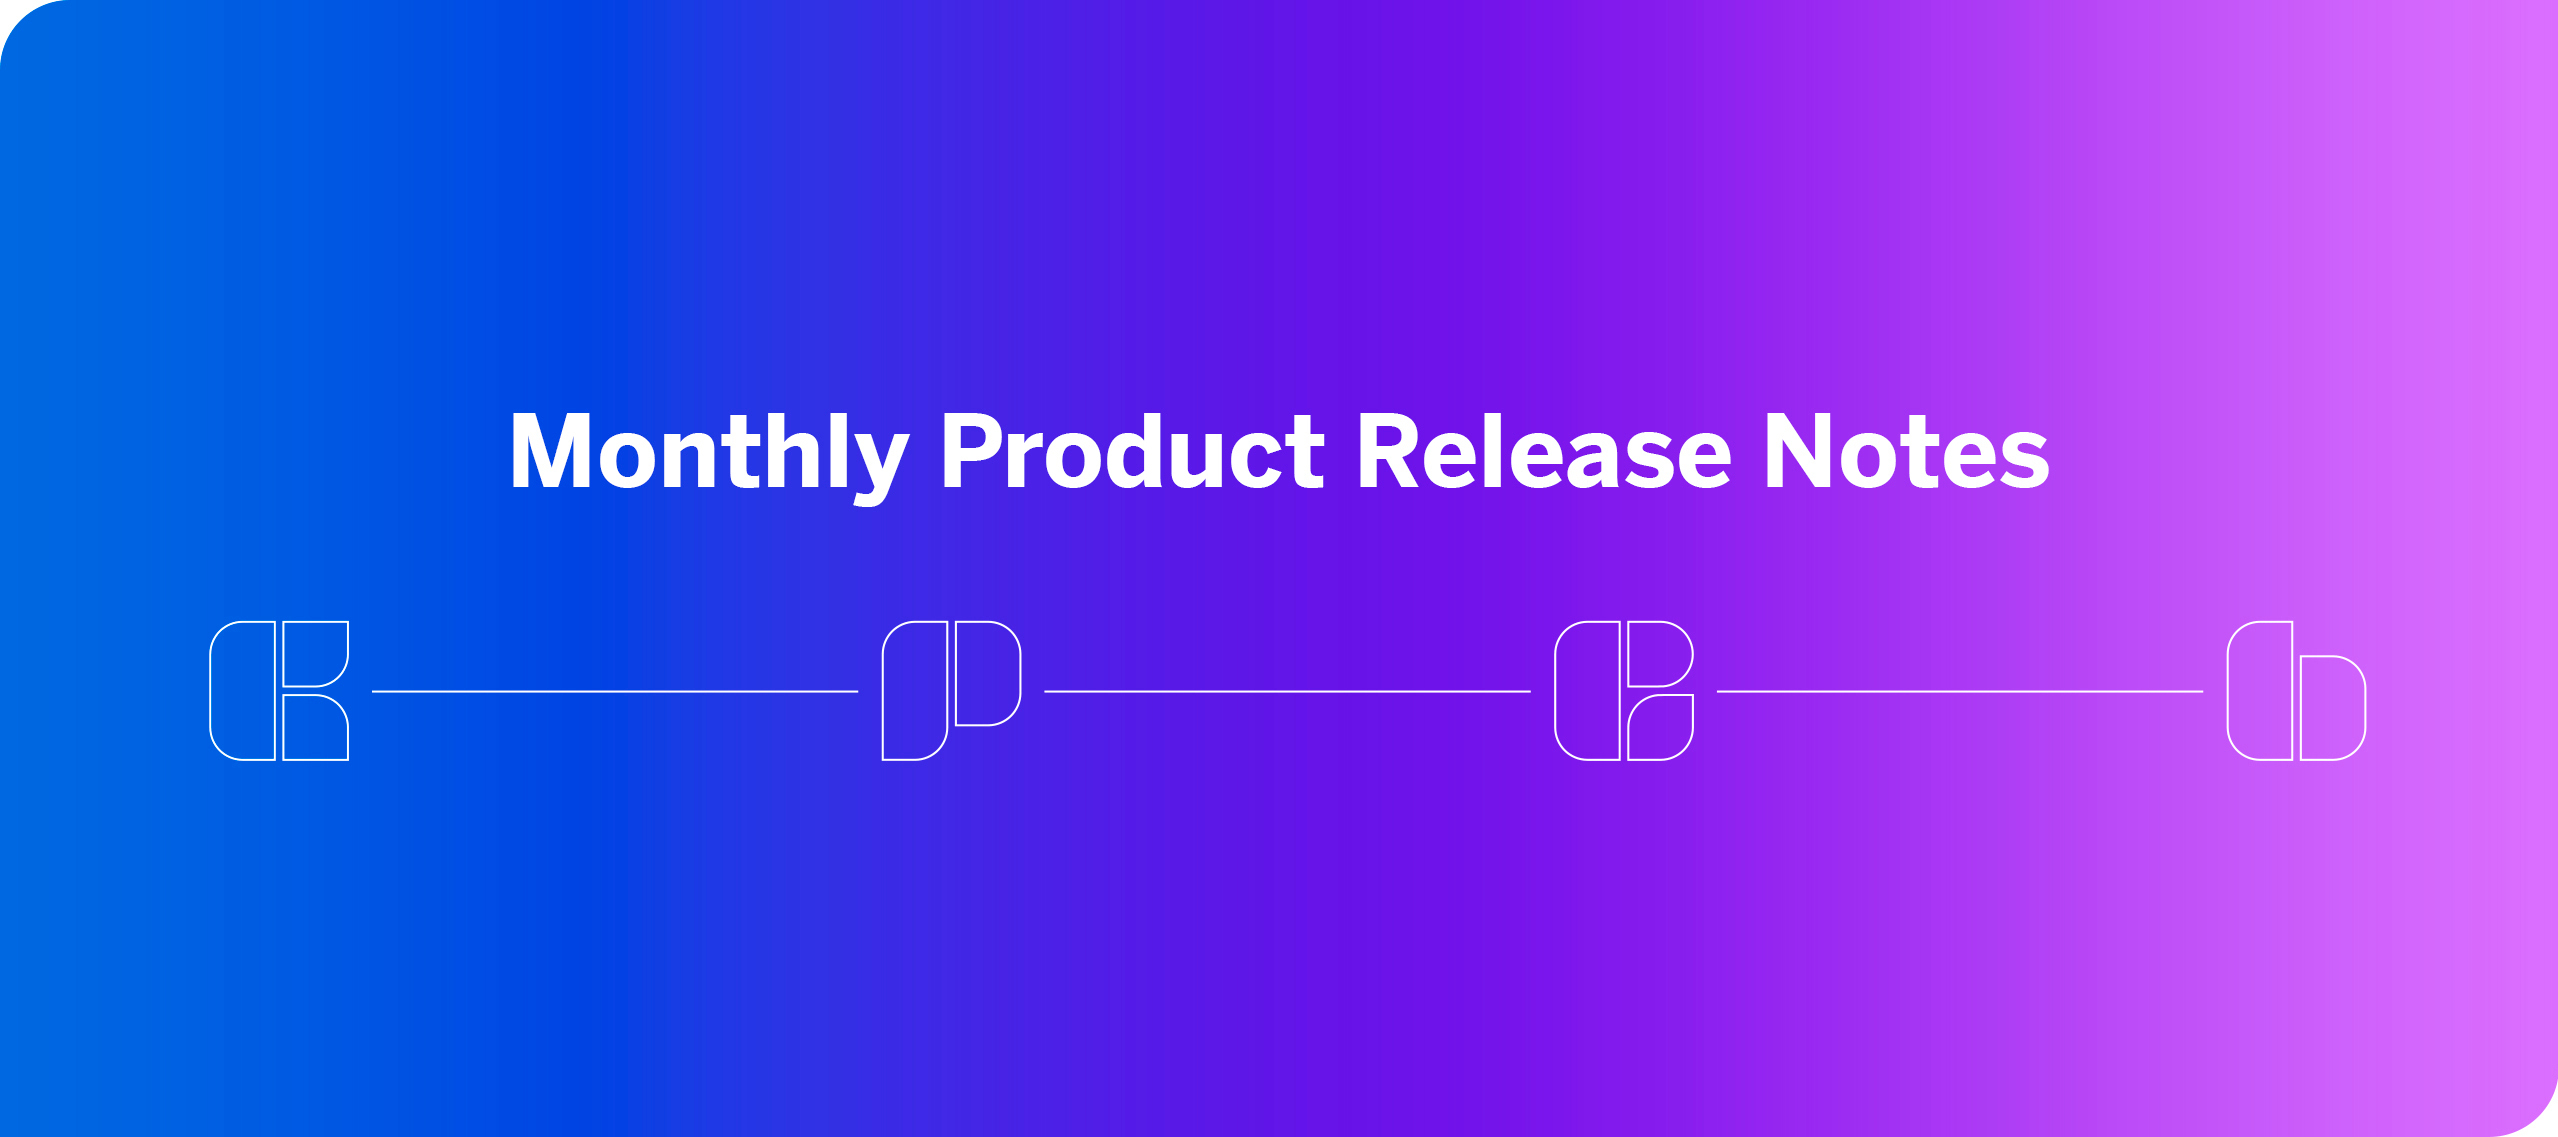 Introducing Monthly Product Release Notes